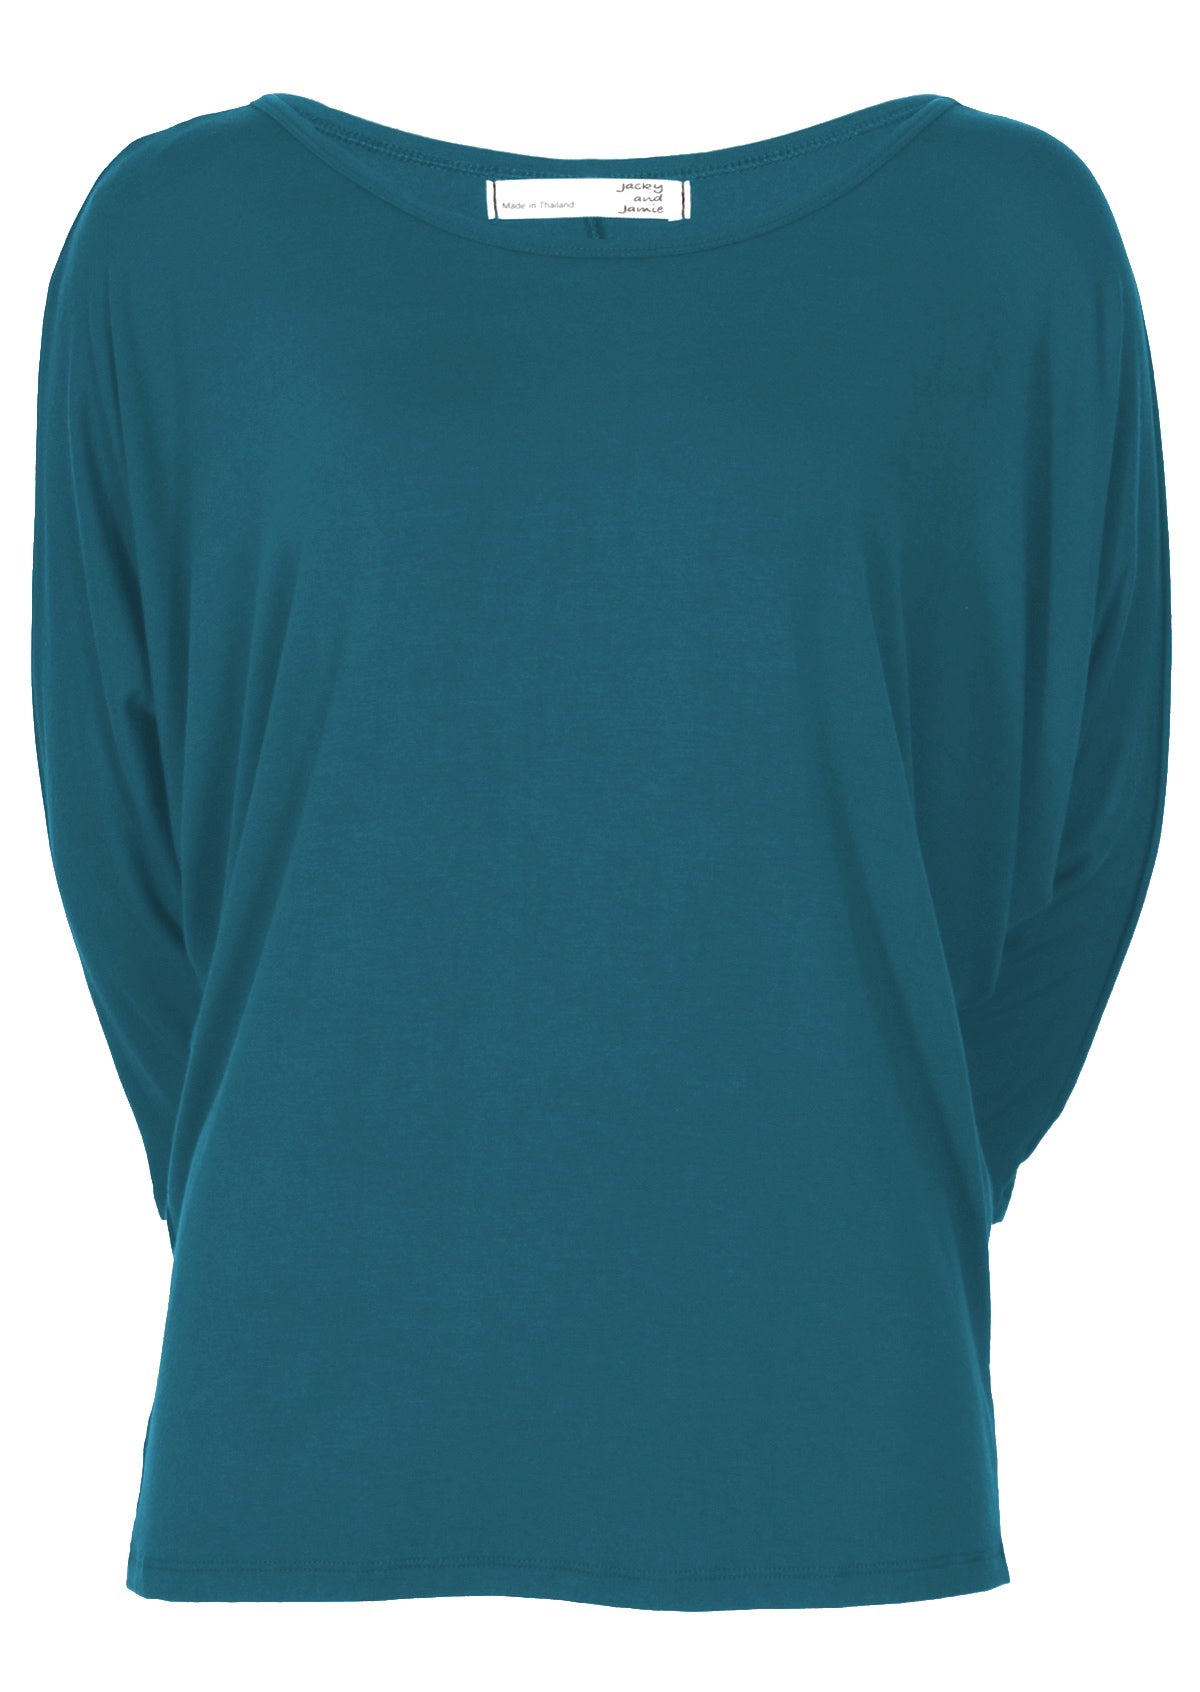 Front view of women's 3/4 sleeve rayon batwing round neckline teal top.